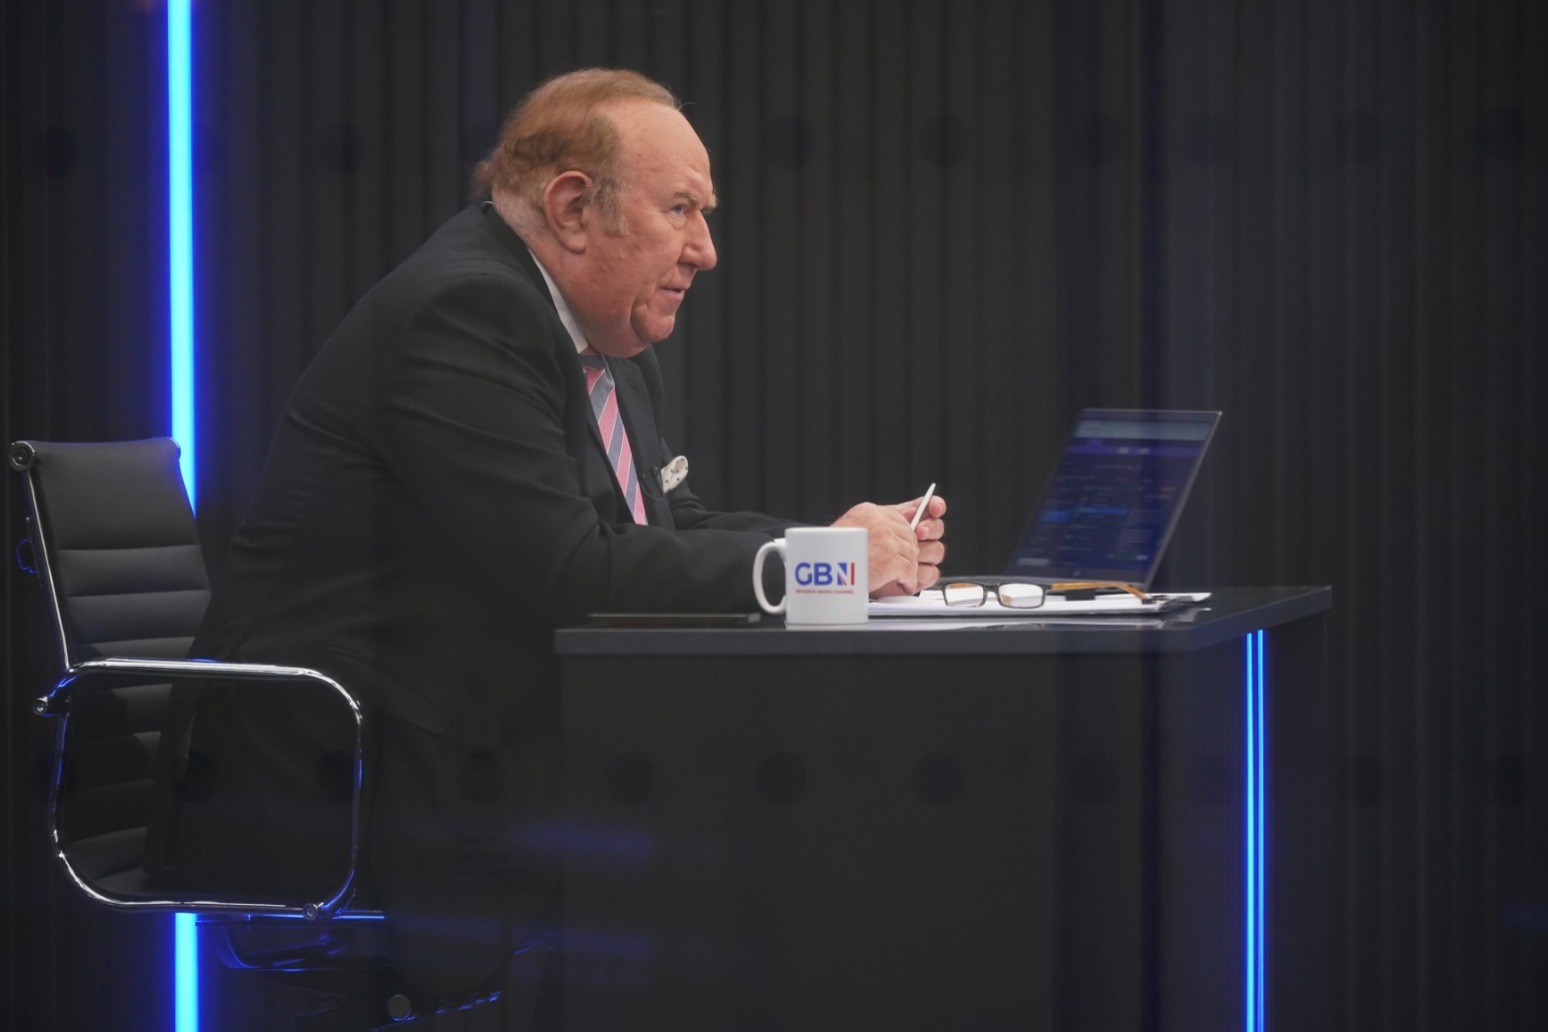 Working at GB News almost gave me a breakdown, claims Andrew Neil 